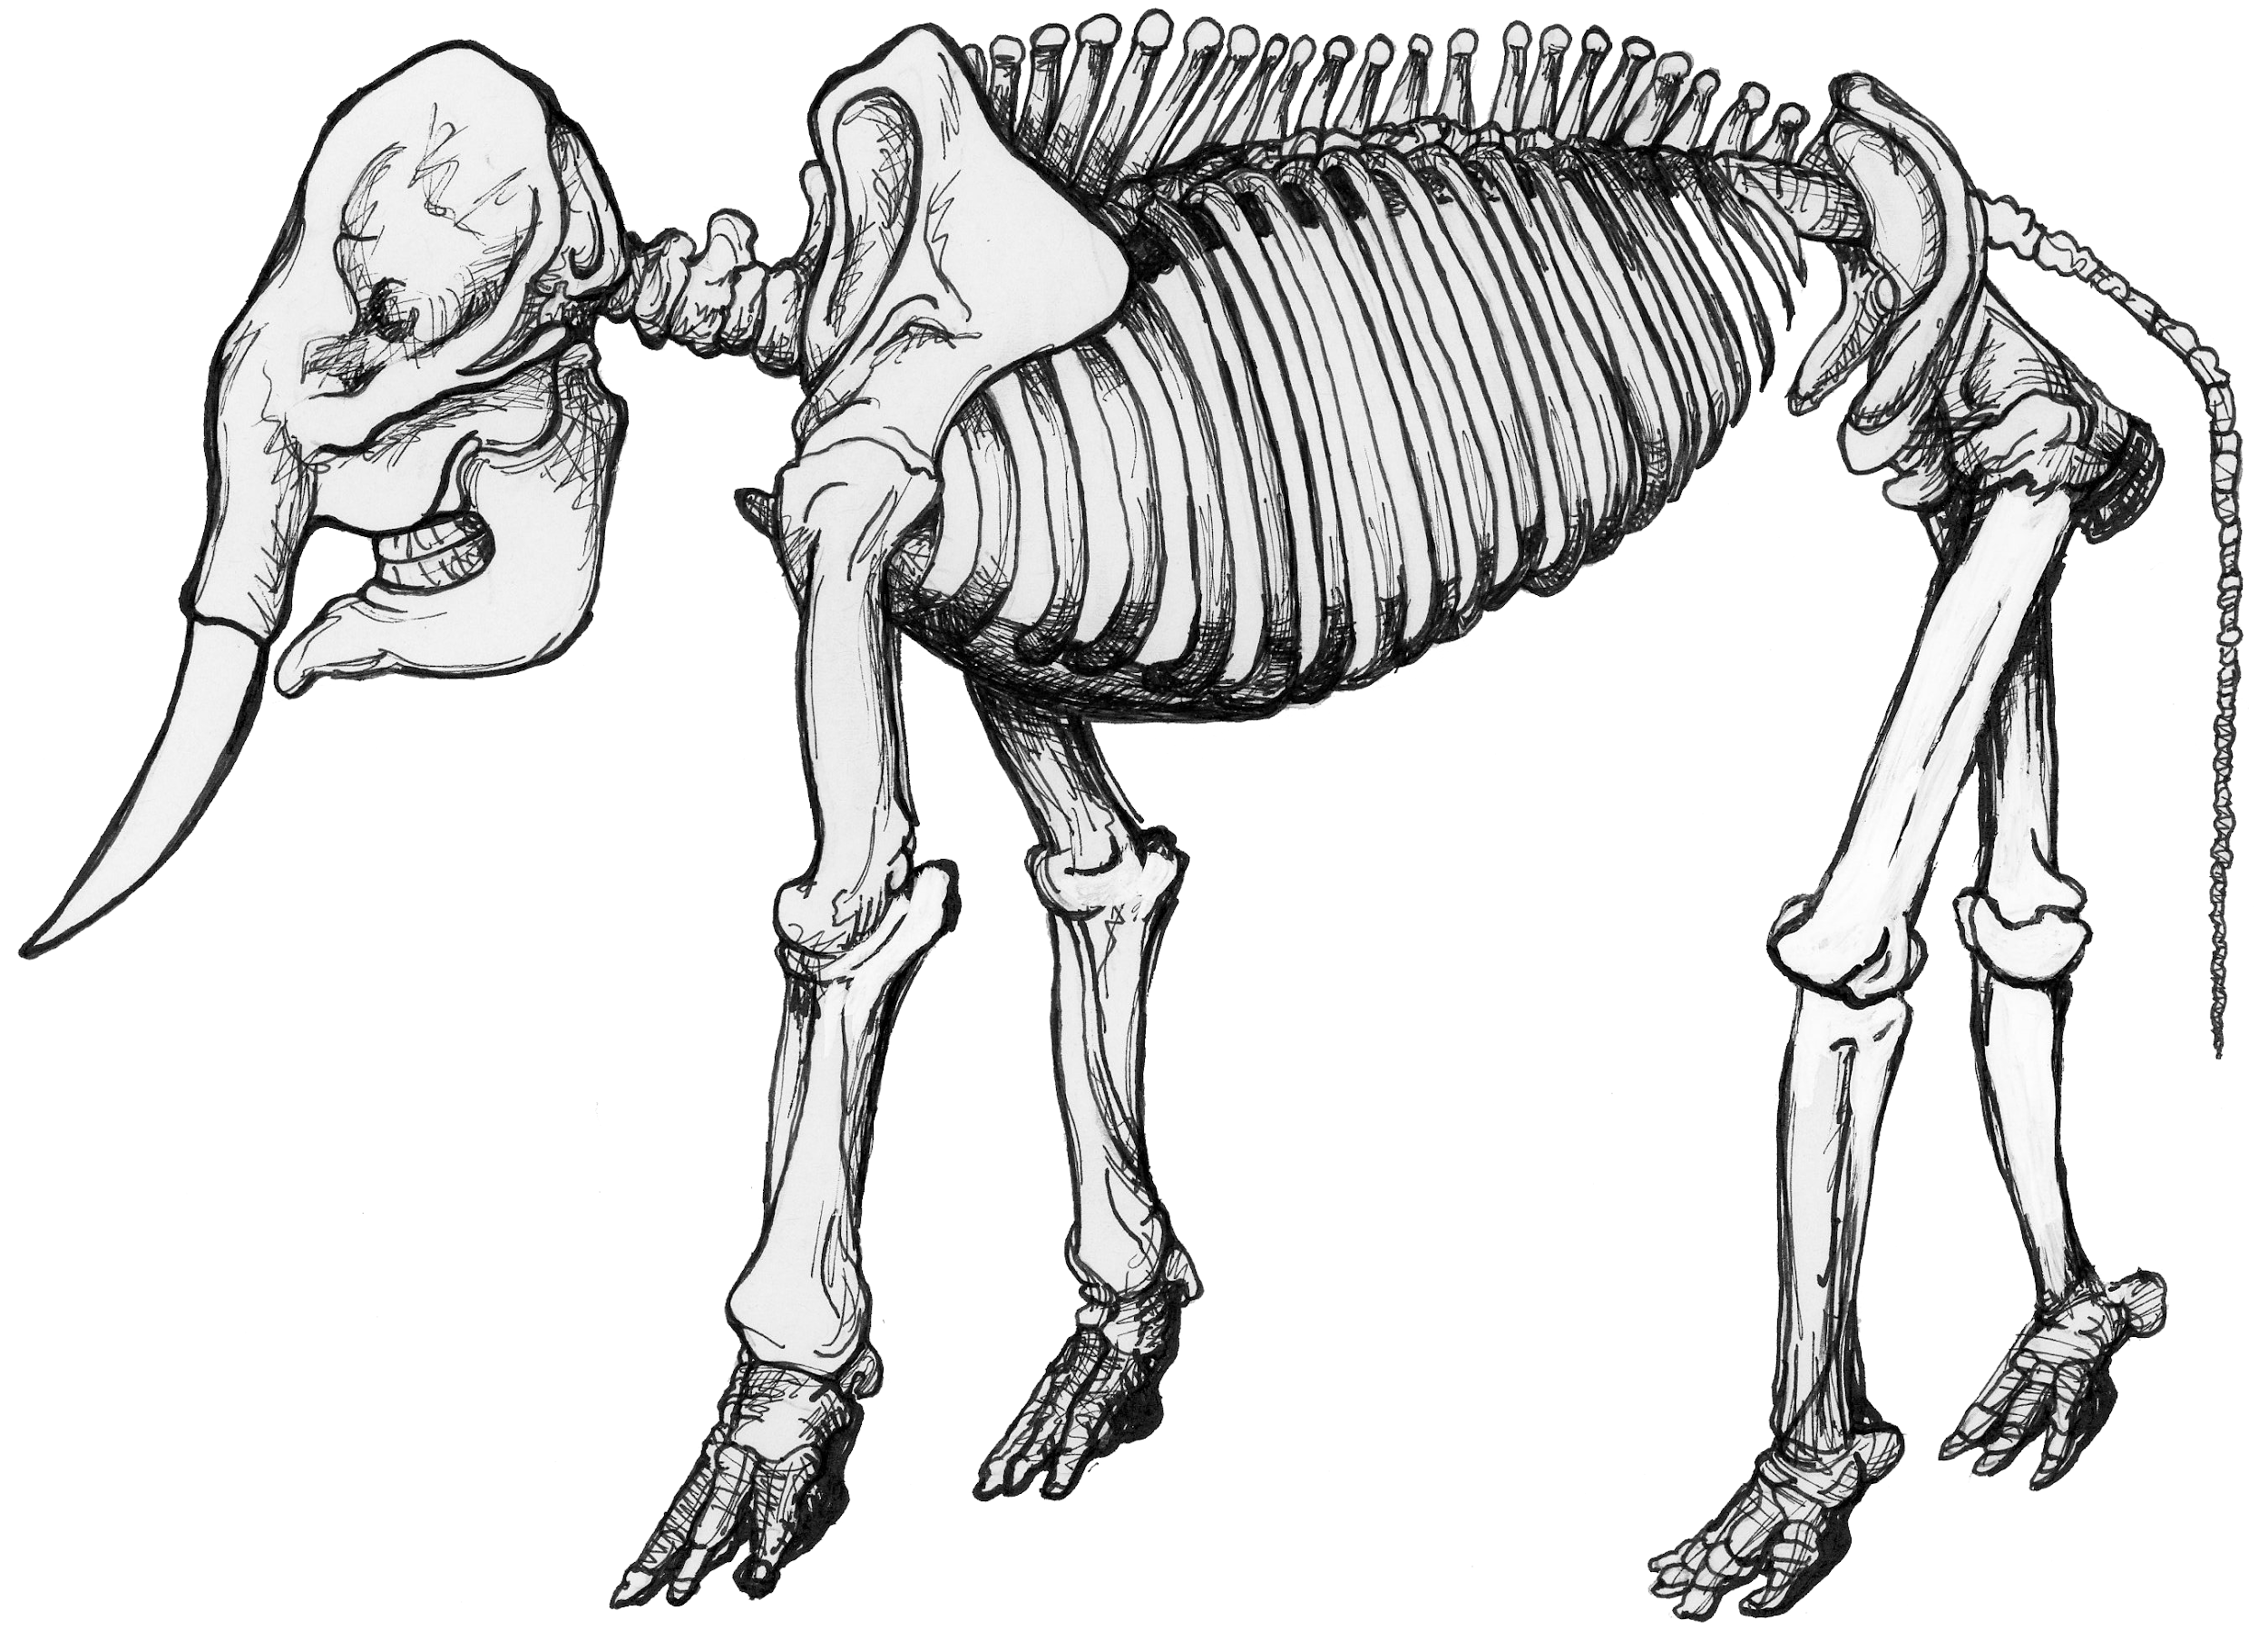 Side-view of an elephant skeleton.